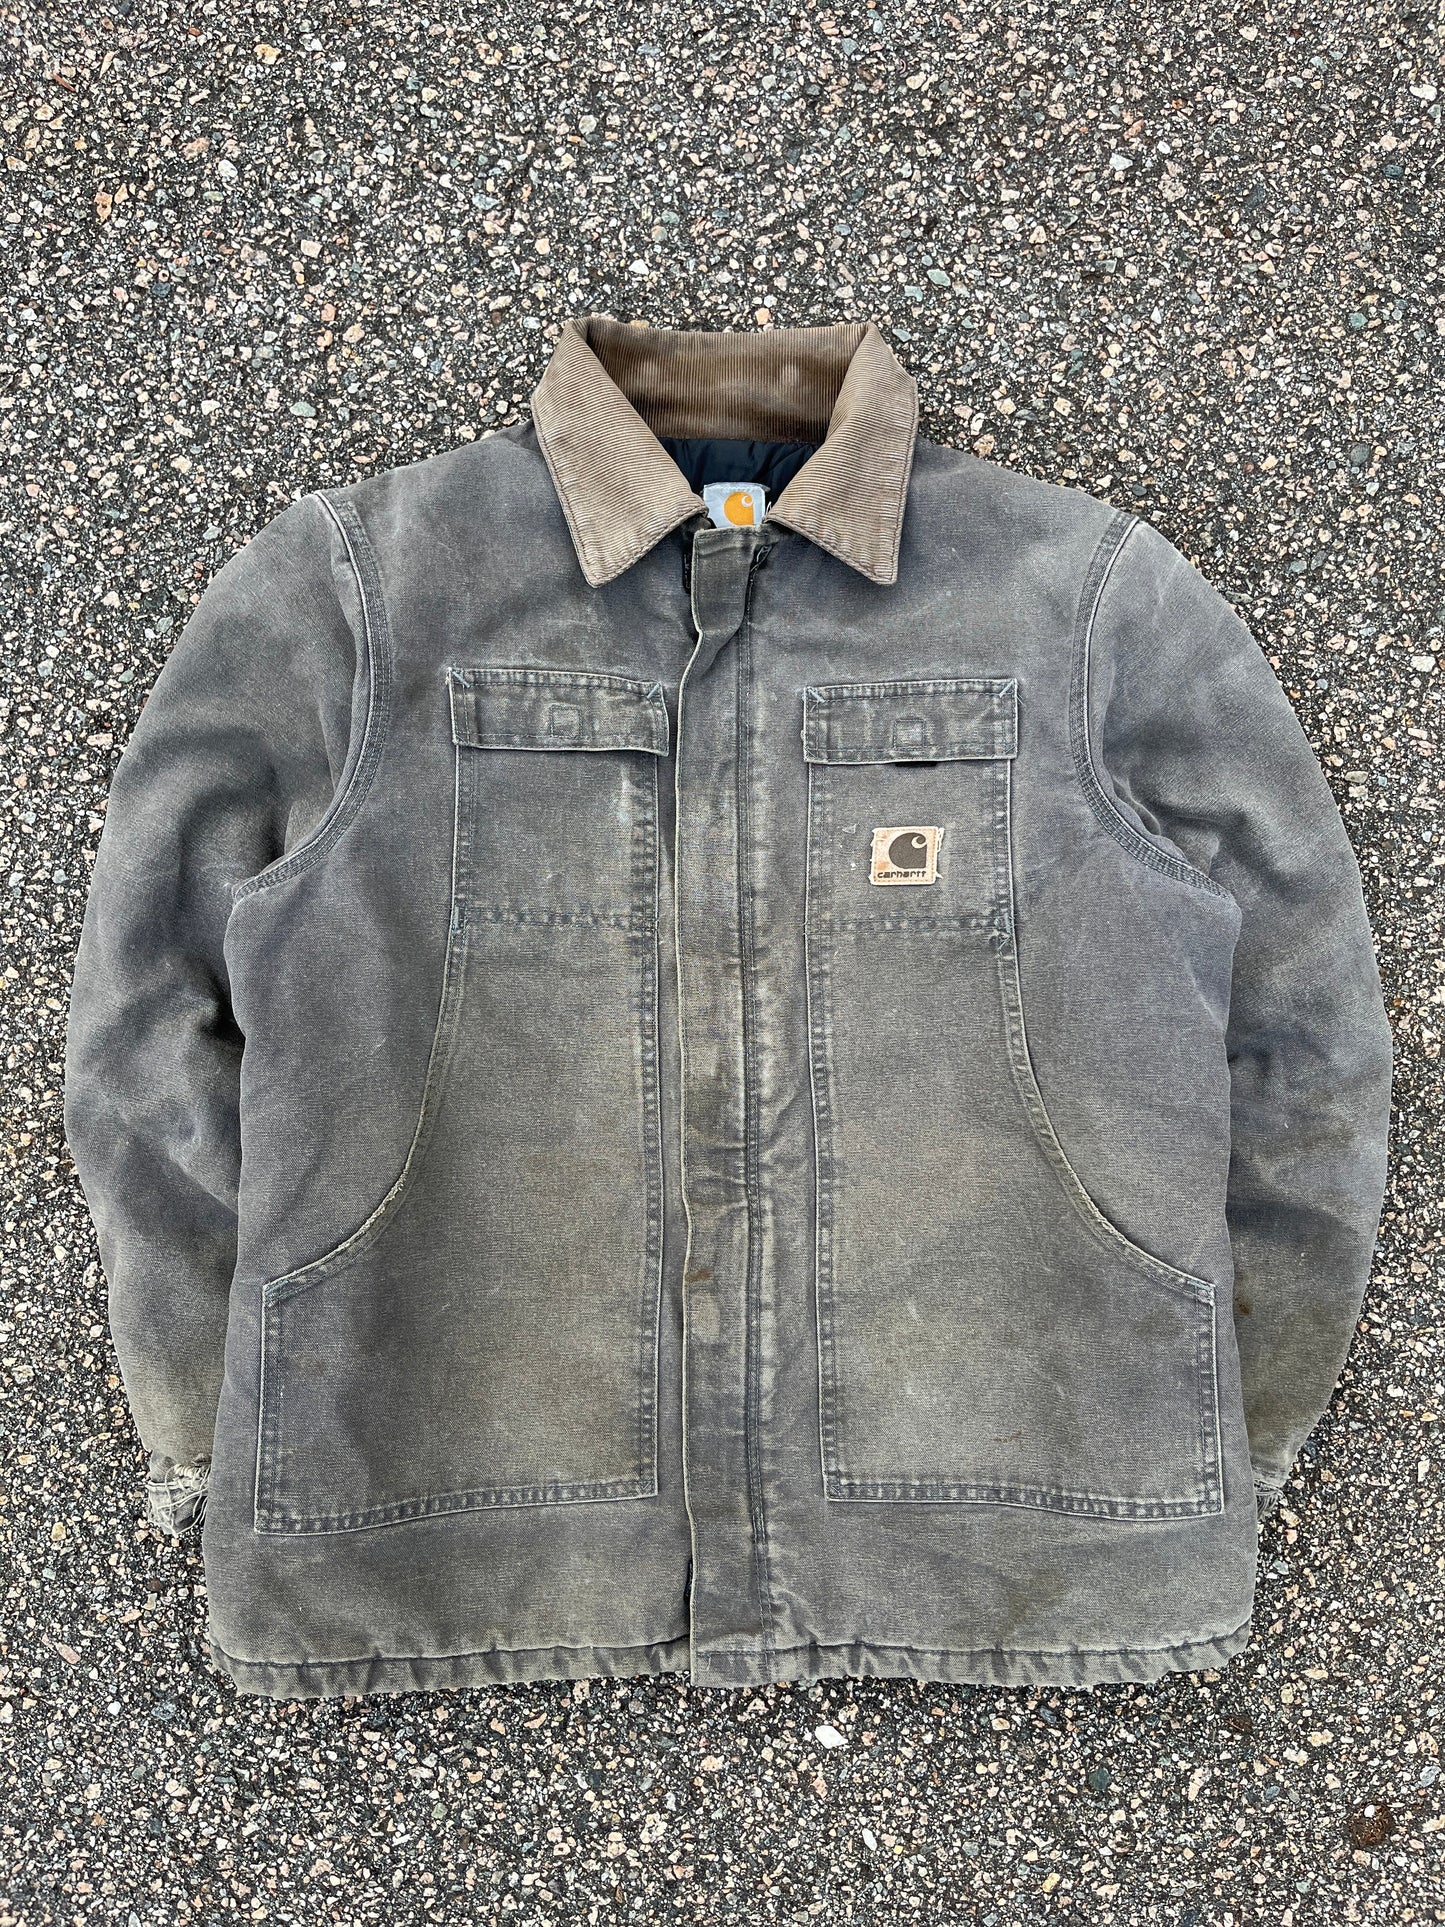 Faded Graphite Blue Carhartt Arctic Style Jacket - Large